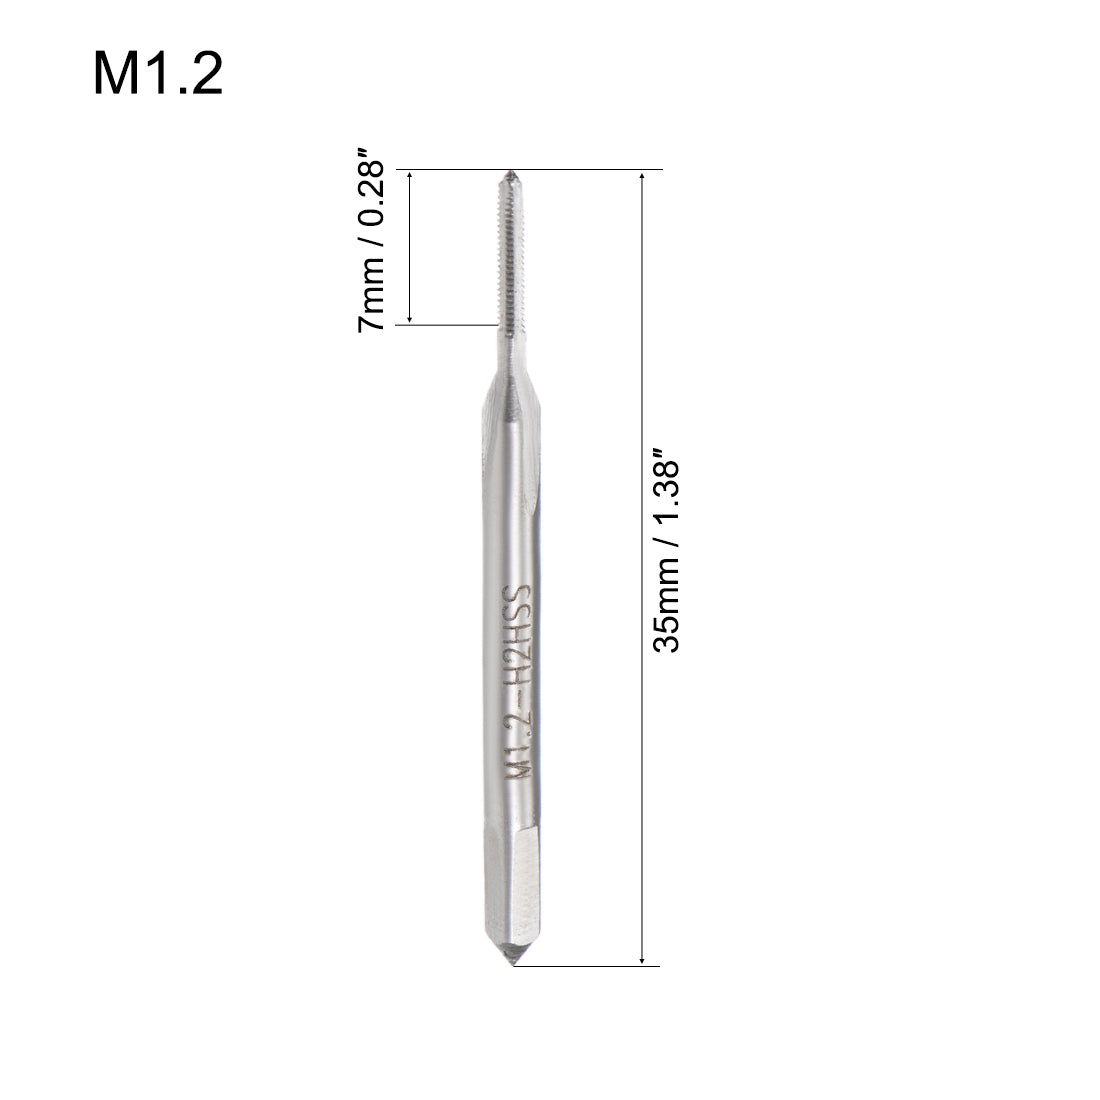 Uxcell Uxcell Metric Machine Tap M3.5 Thread 0.35 Pitch 3 Straight Flutes H2 High Speed Steel 10pcs